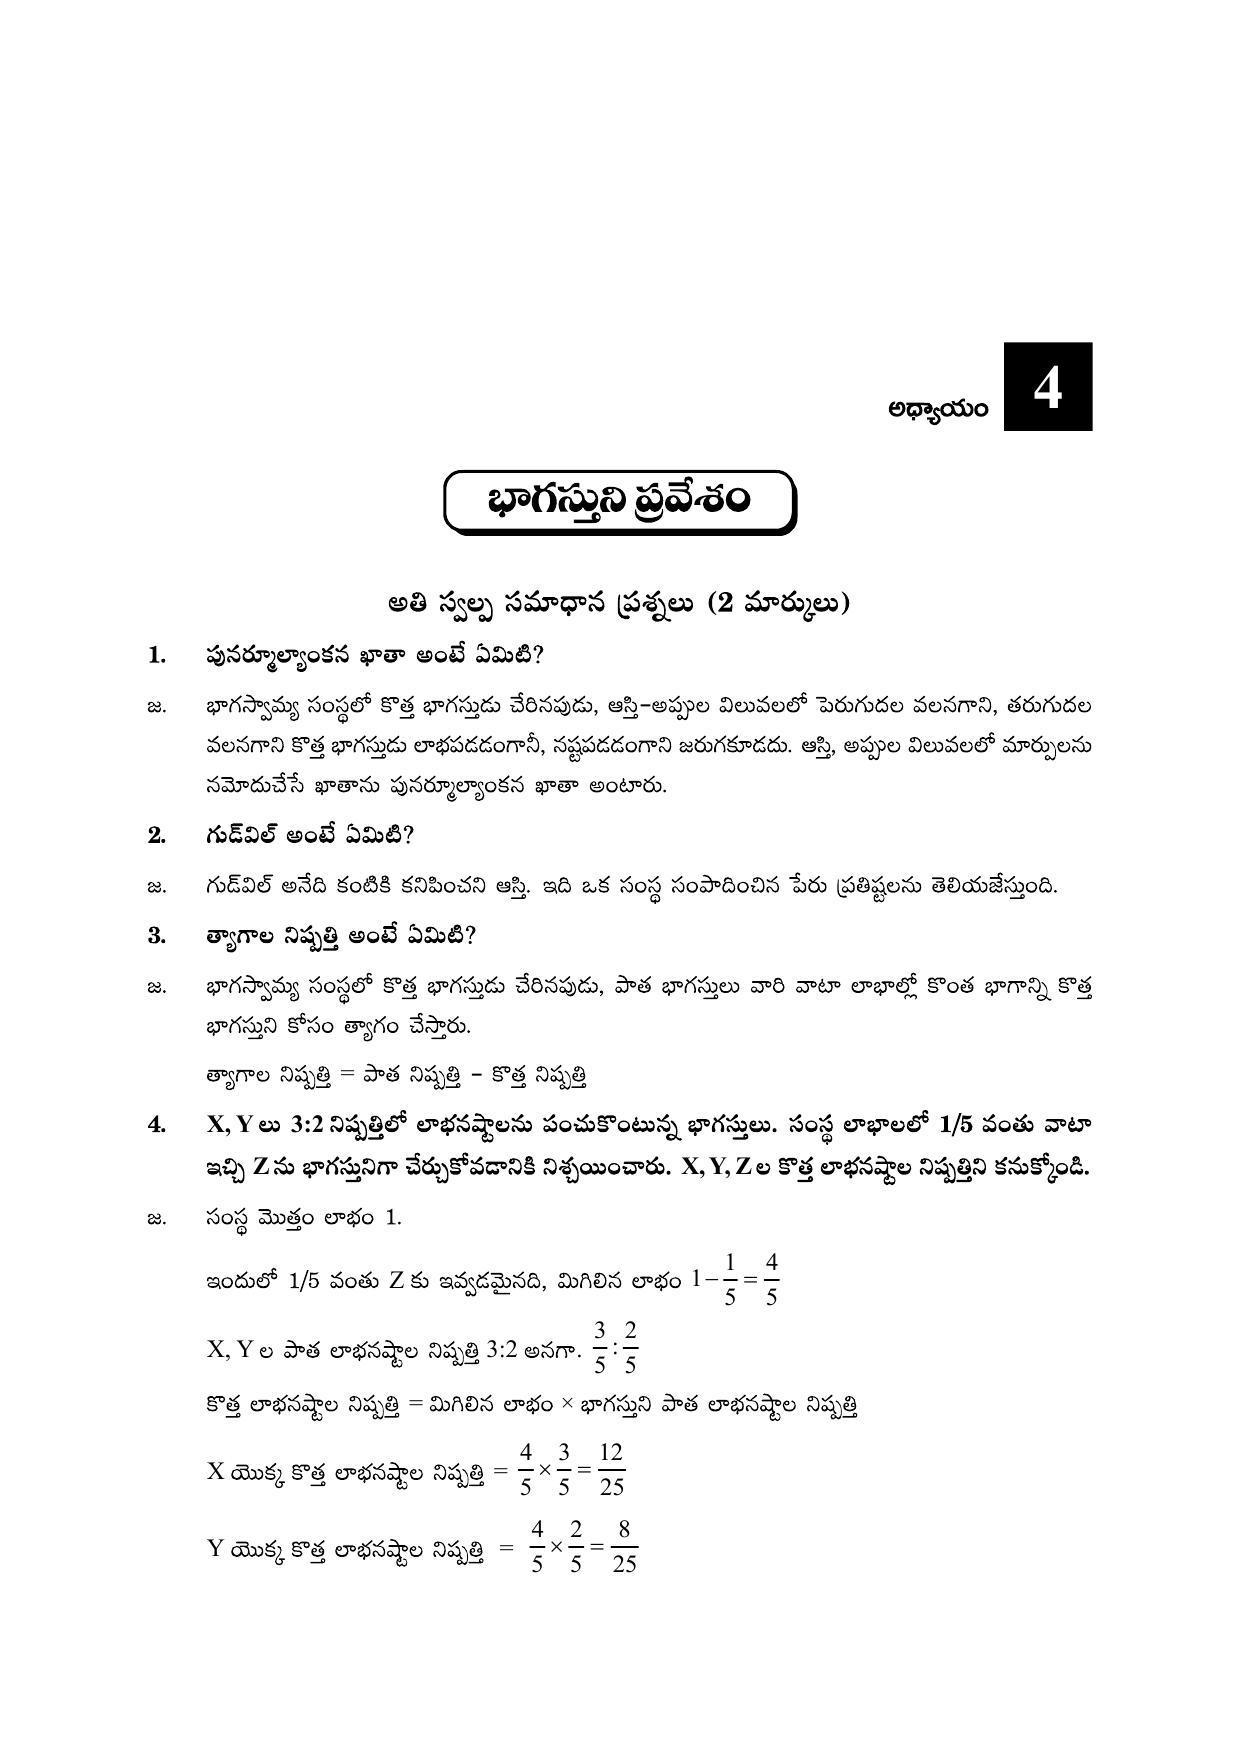 TS SCERT Inter 2nd Year Commerce &Accts II yr TM Path 1 (Telugu Medium) Text Book - Page 42